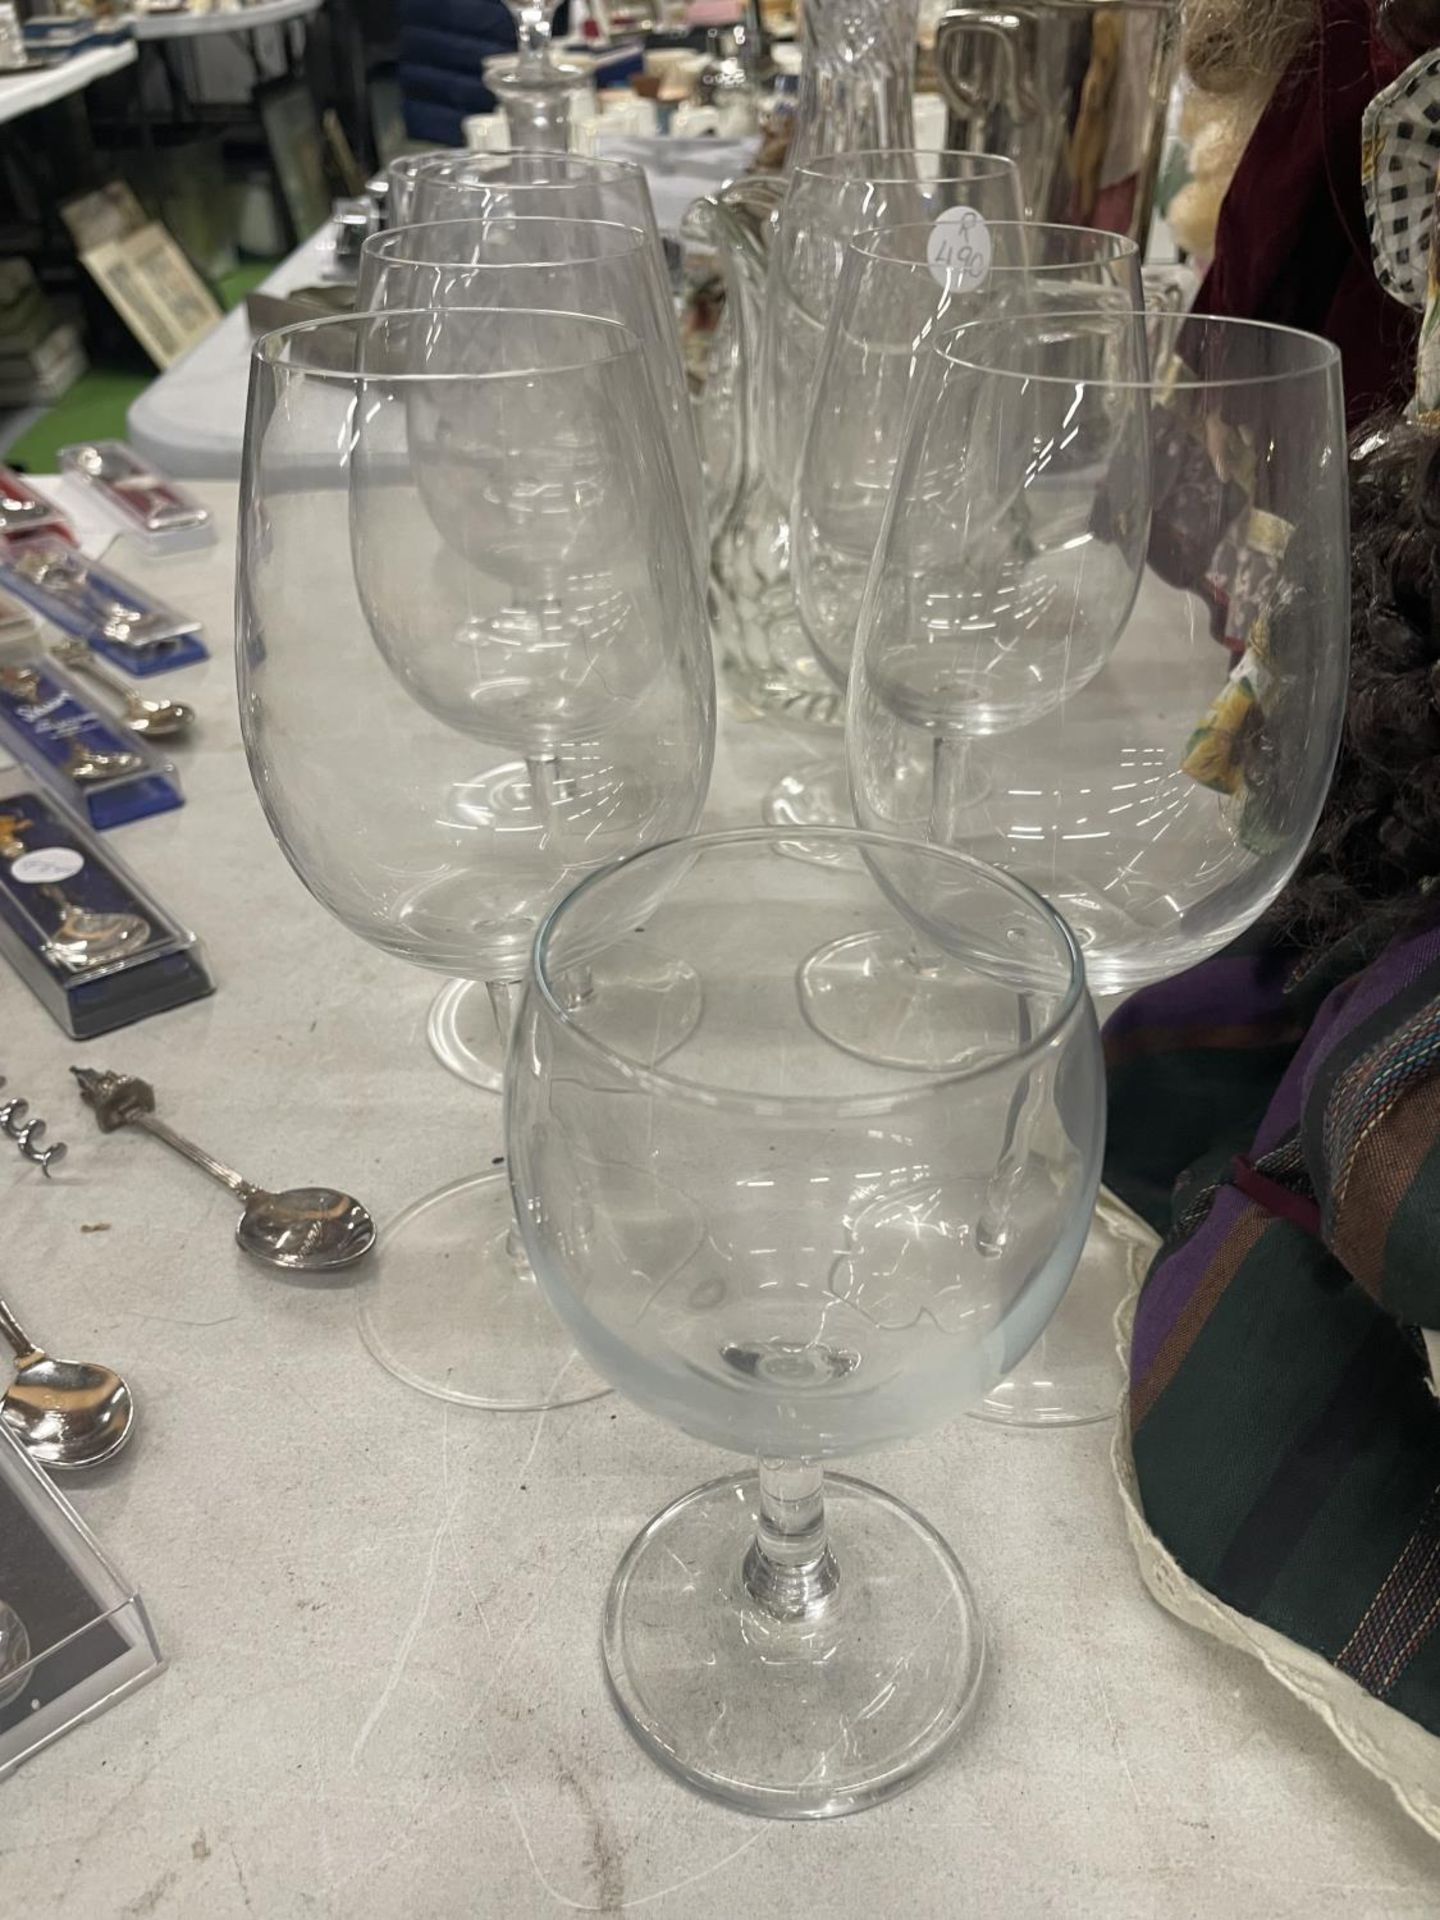 A QUANTITY OF GLASSWARE TO INCLUDE A DECANTER, VASE, JUG AND WINE GLASSES - Image 2 of 3